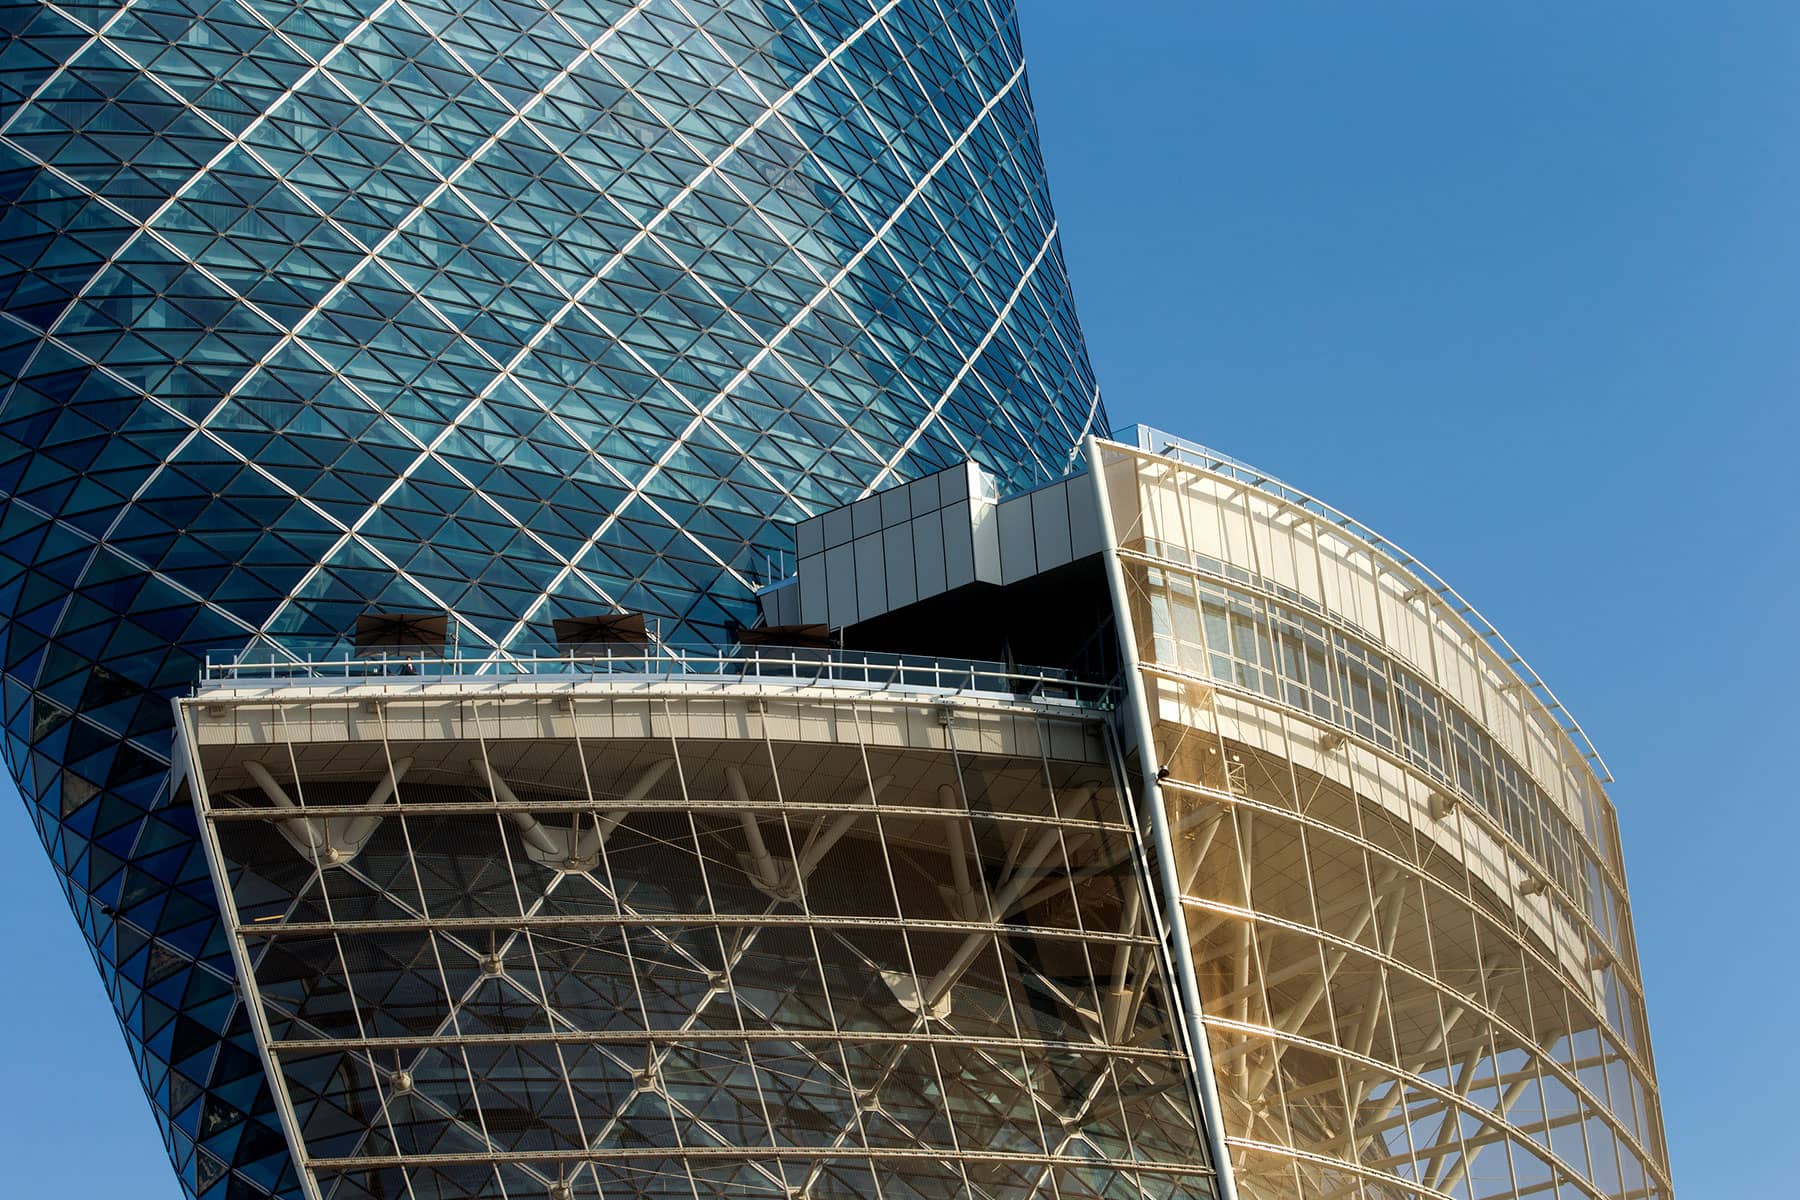 Architecture Photography: Abstract Perspective of façade at Capital Gate Building, Abu Dhabi.